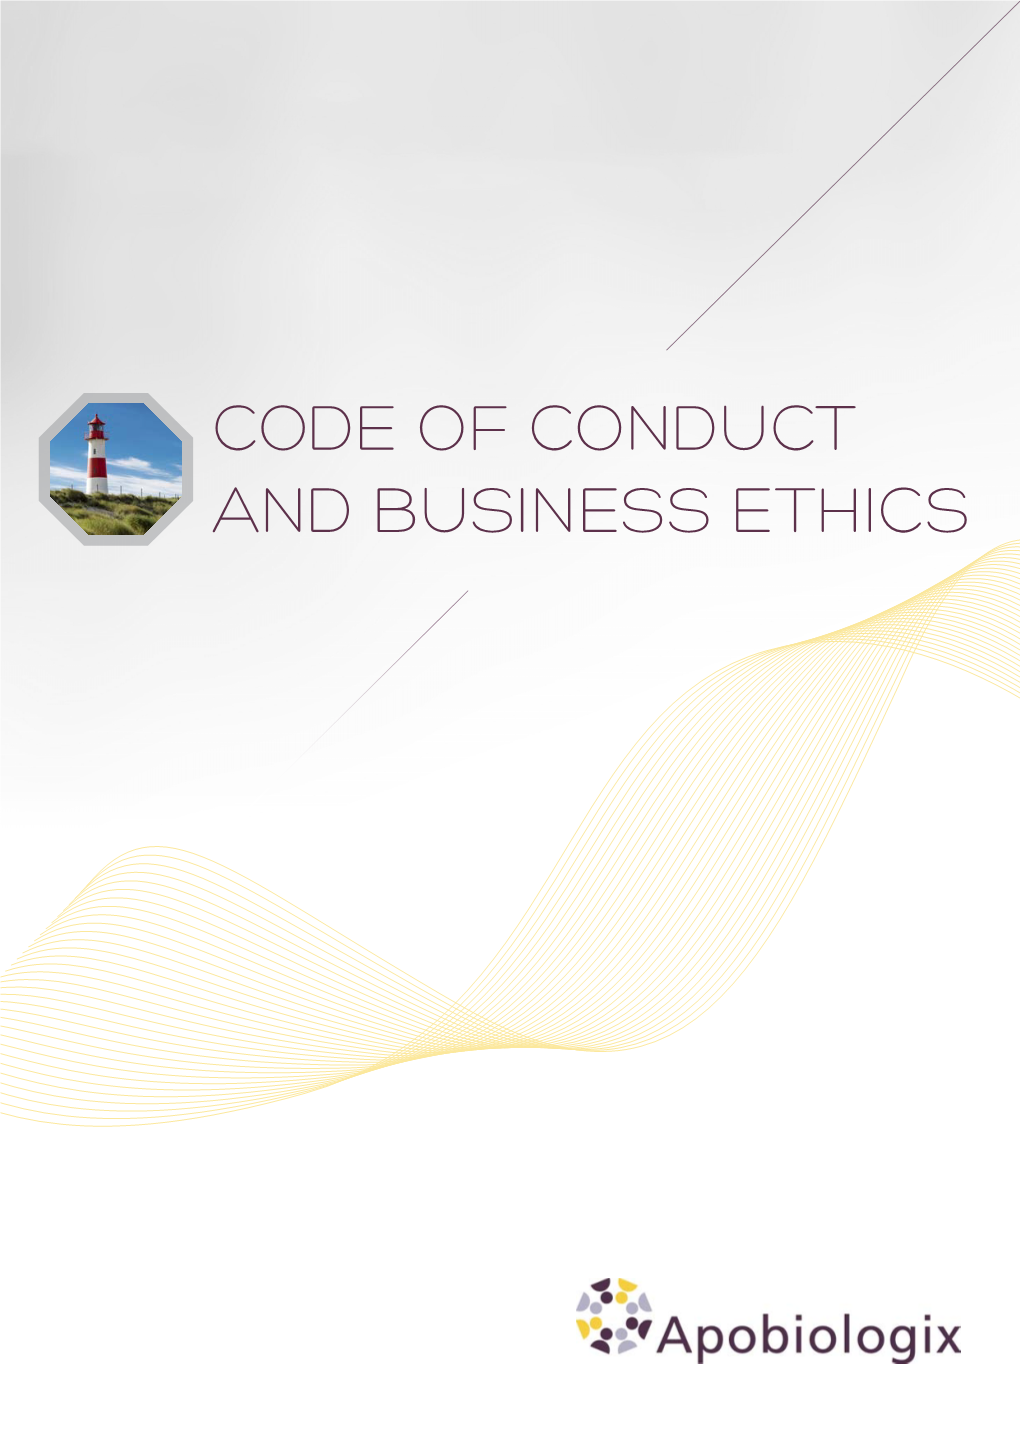 CODE of CONDUCT and BUSINESS ETHICS a Message from Mike Woolcock, Senior Vice President